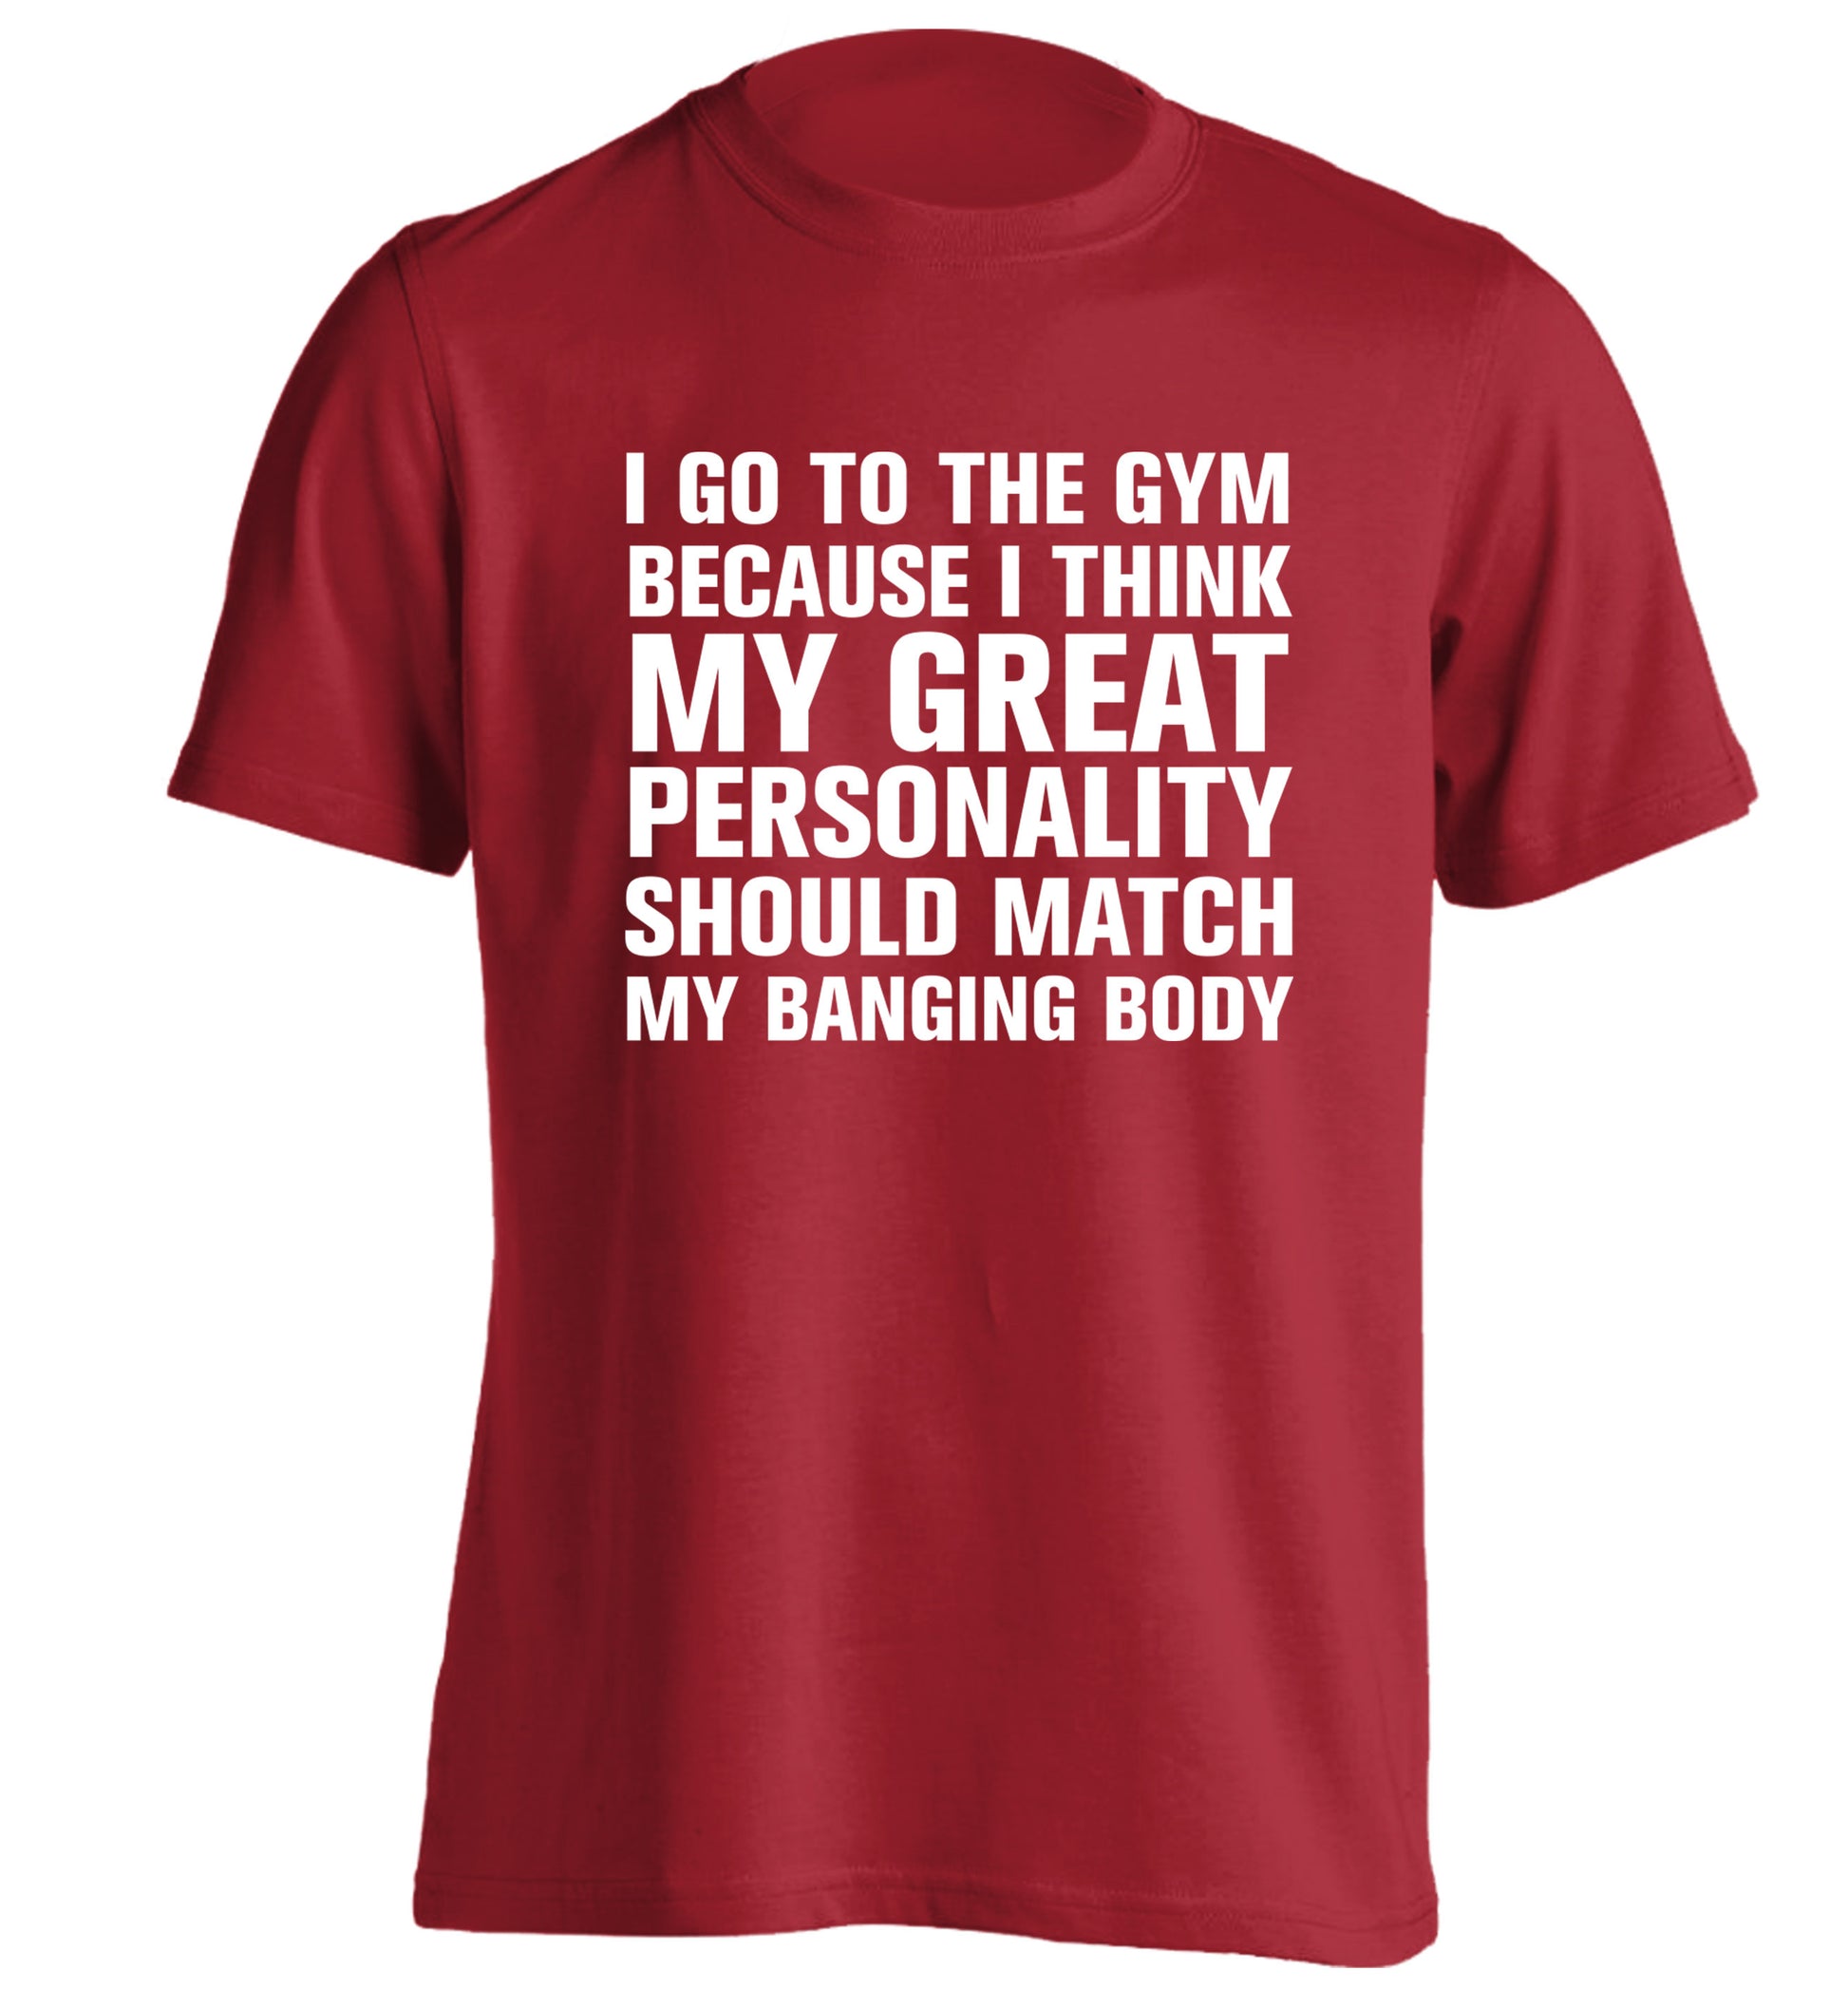 I go to the gym because I think my great personality should match my banging body adults unisex red Tshirt 2XL